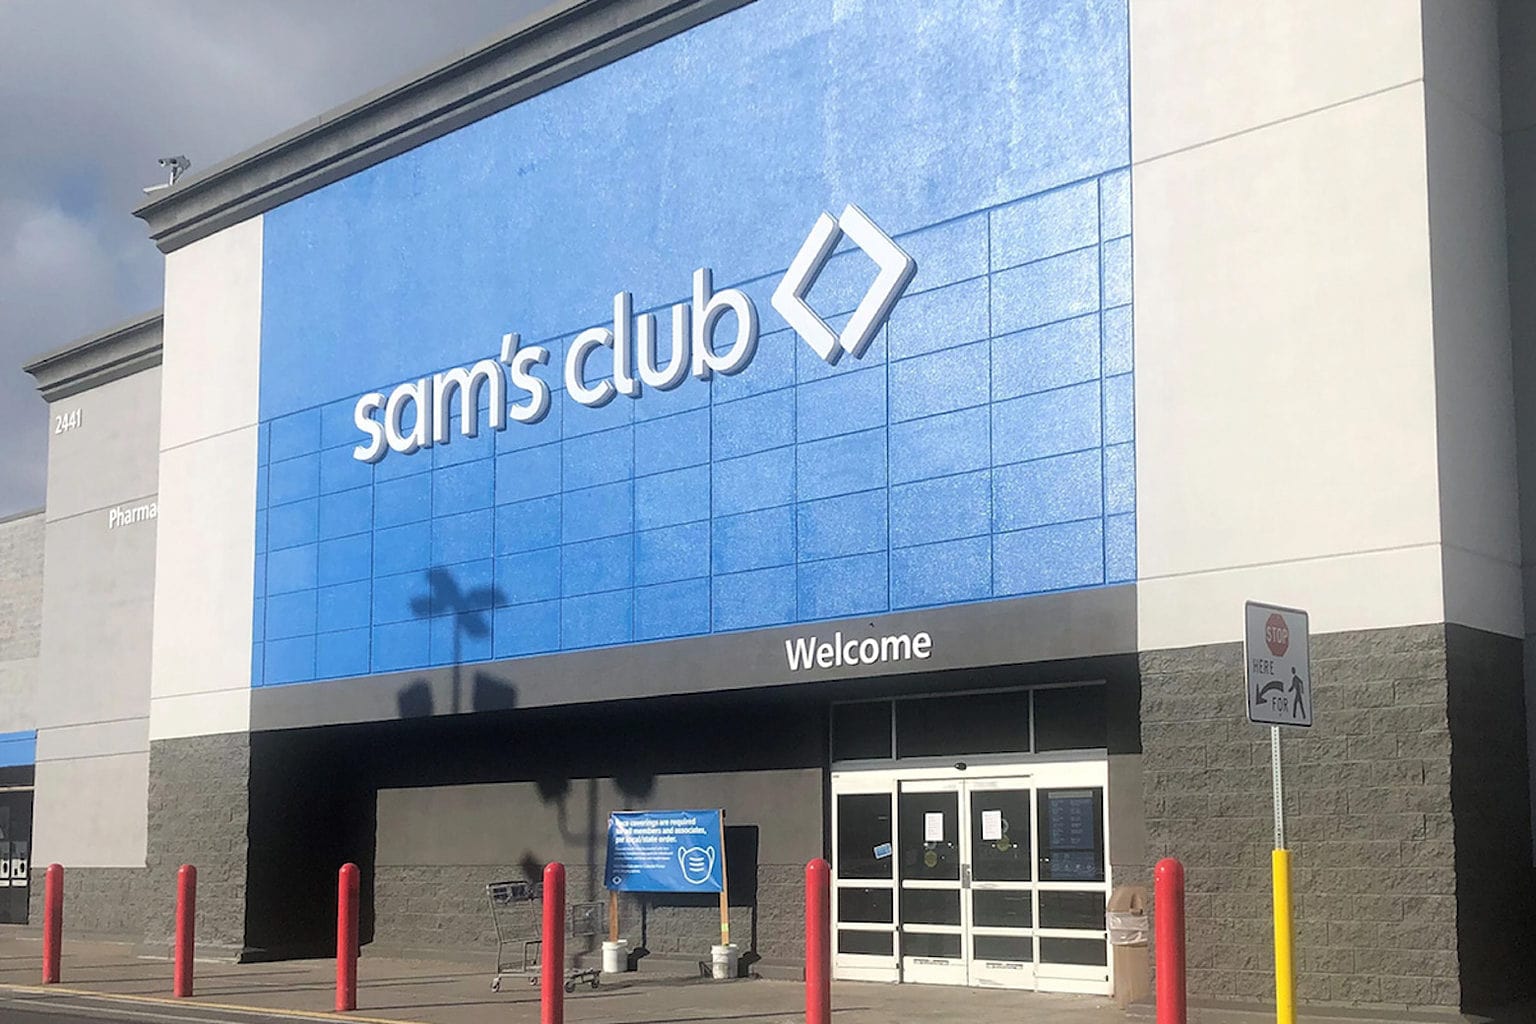 Enjoy full Sam's Club benefits for only a fraction of the price.